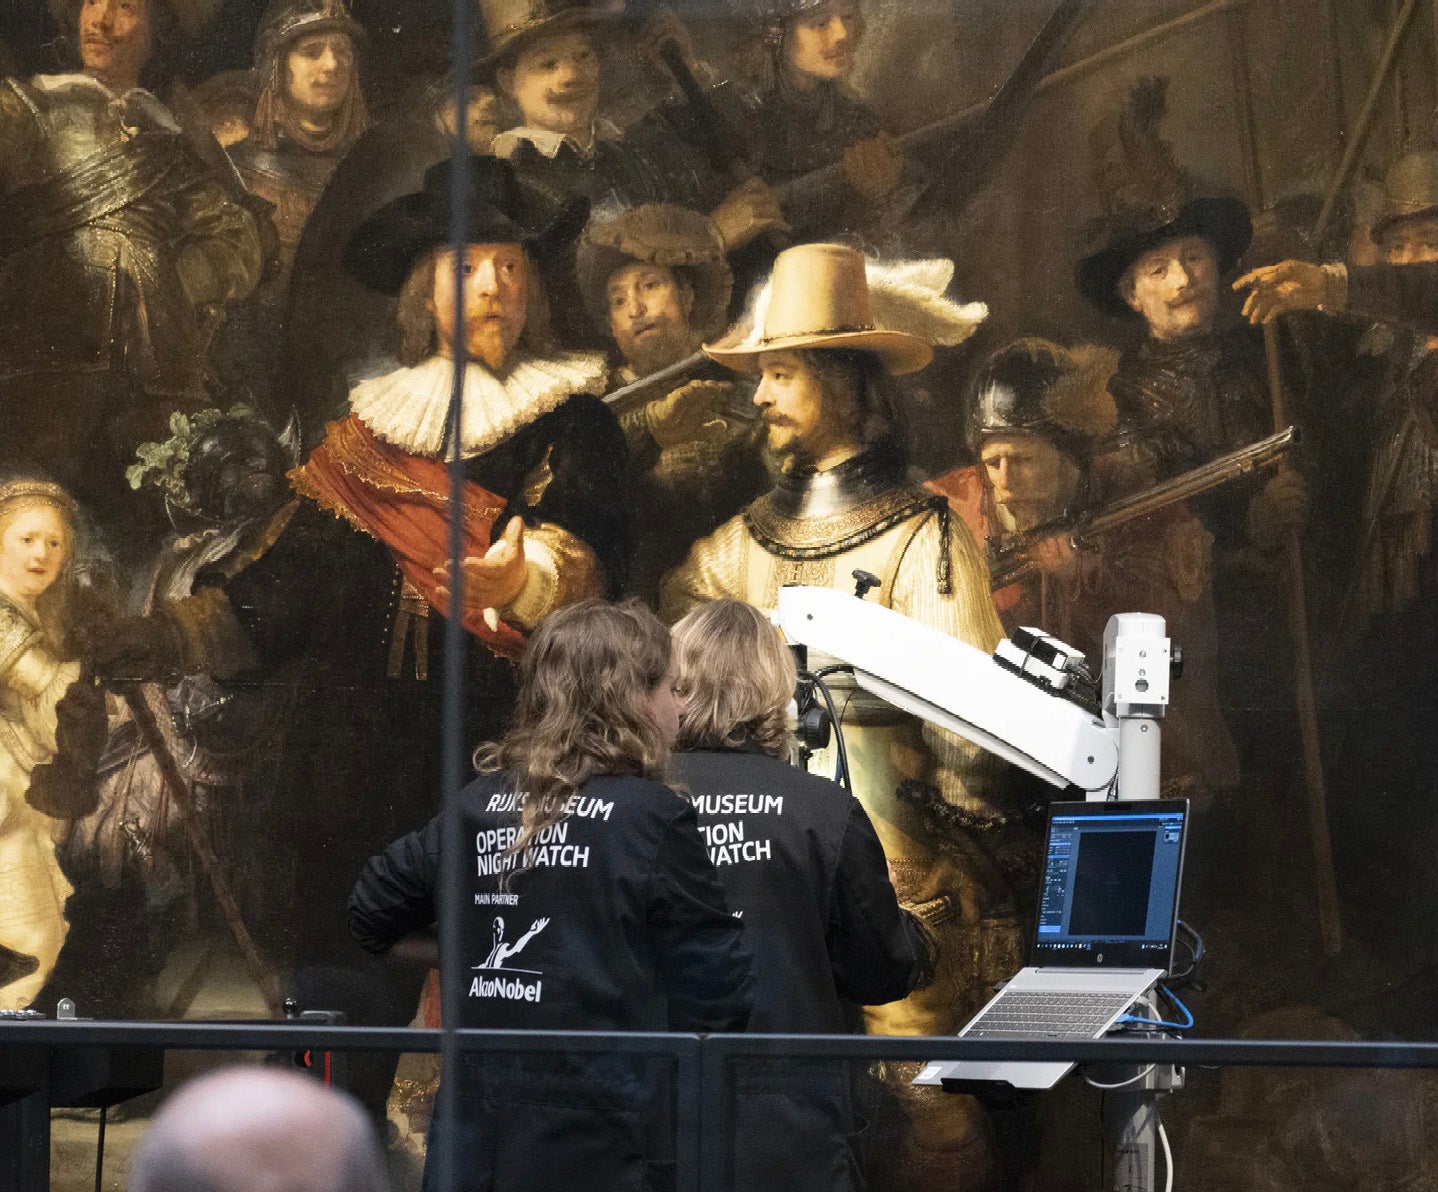 The "Operation Night Watch" team working on the 717-gigapixel scan of Rembrandt's classic work, "the Night Watch."